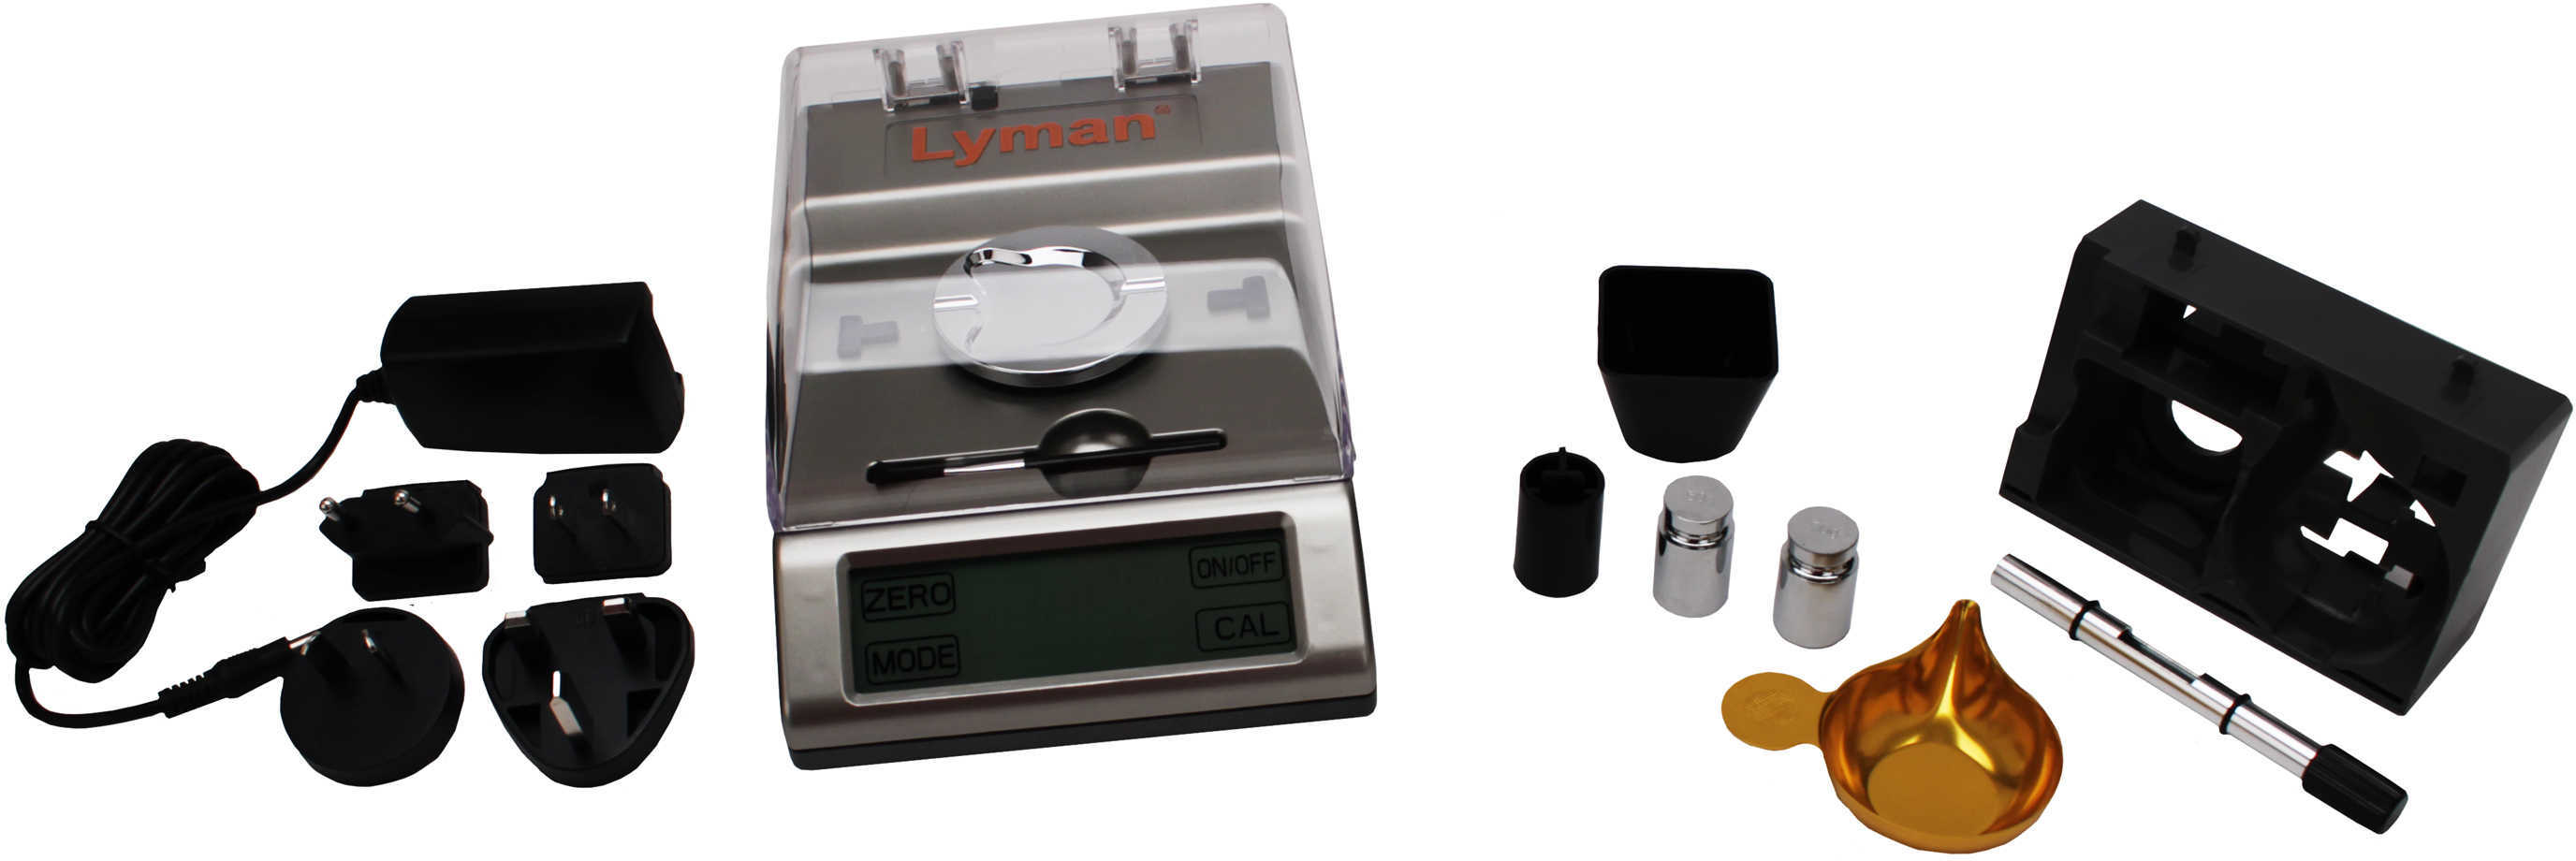 Lyman Accu-Touch 2000 Electronic Scale